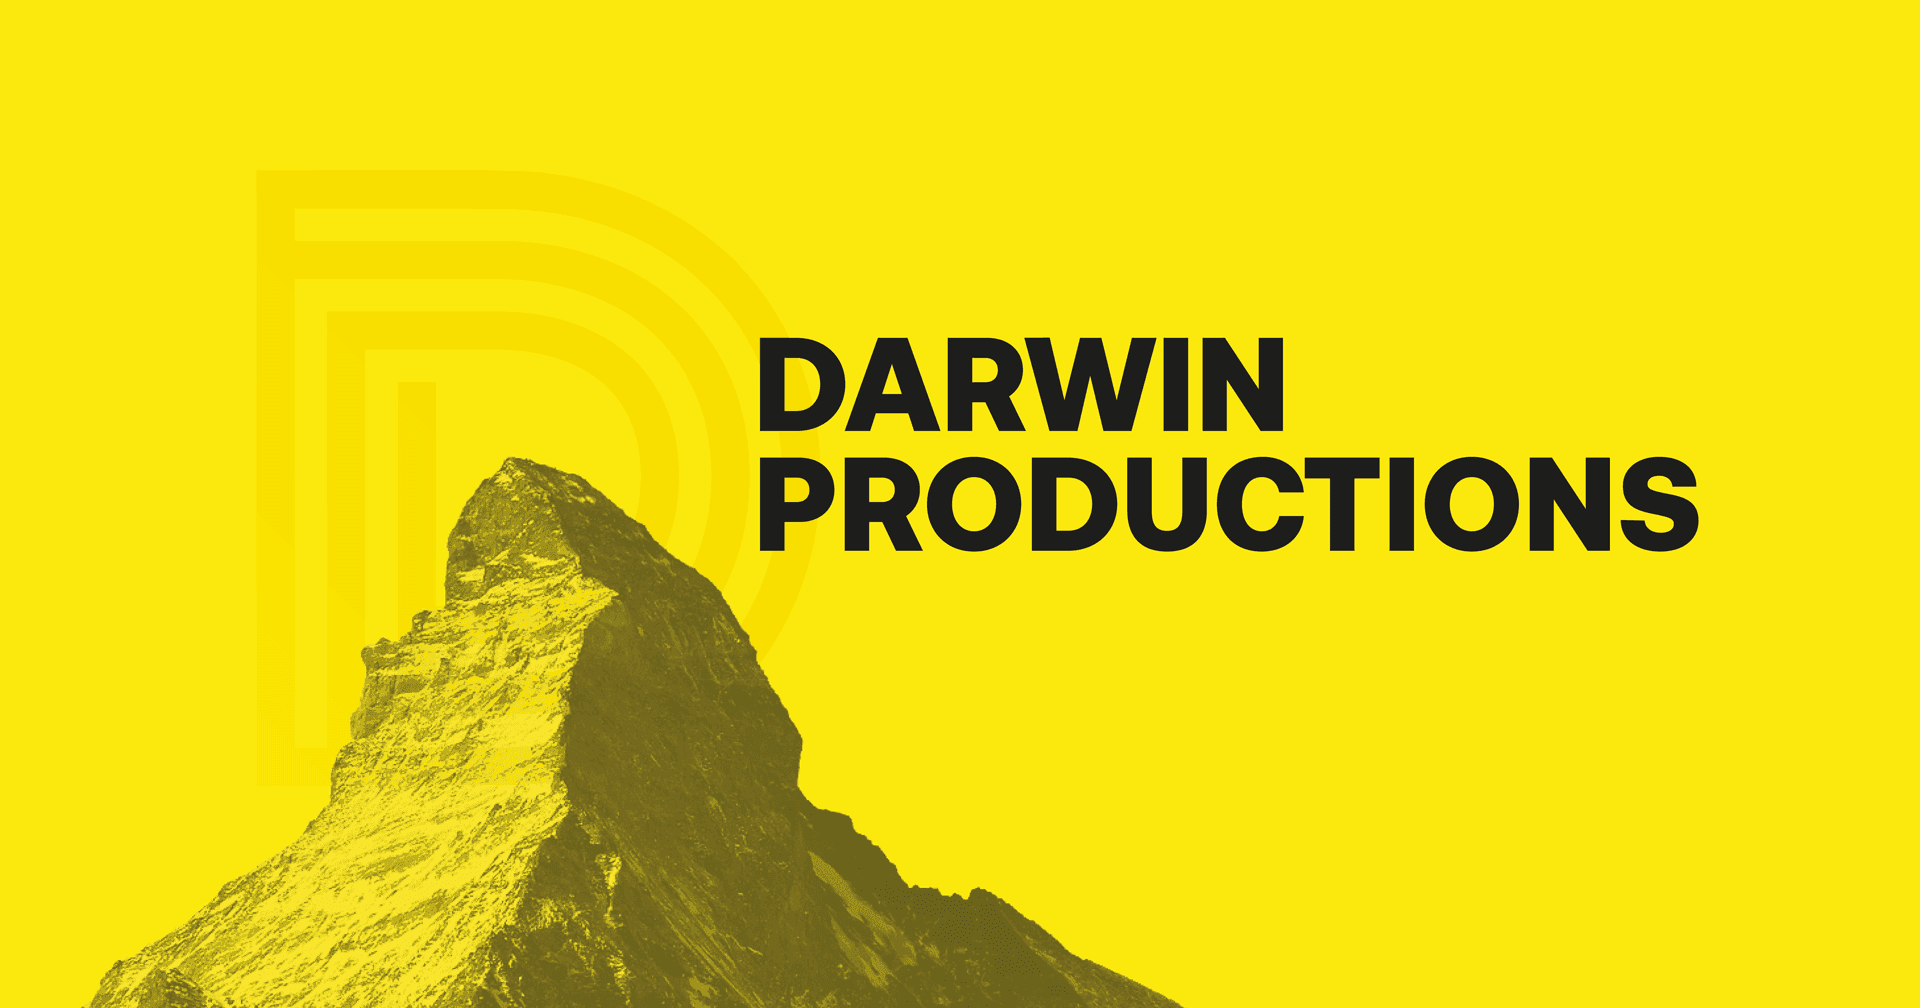 Darwin Digital launches a dedicated video production company